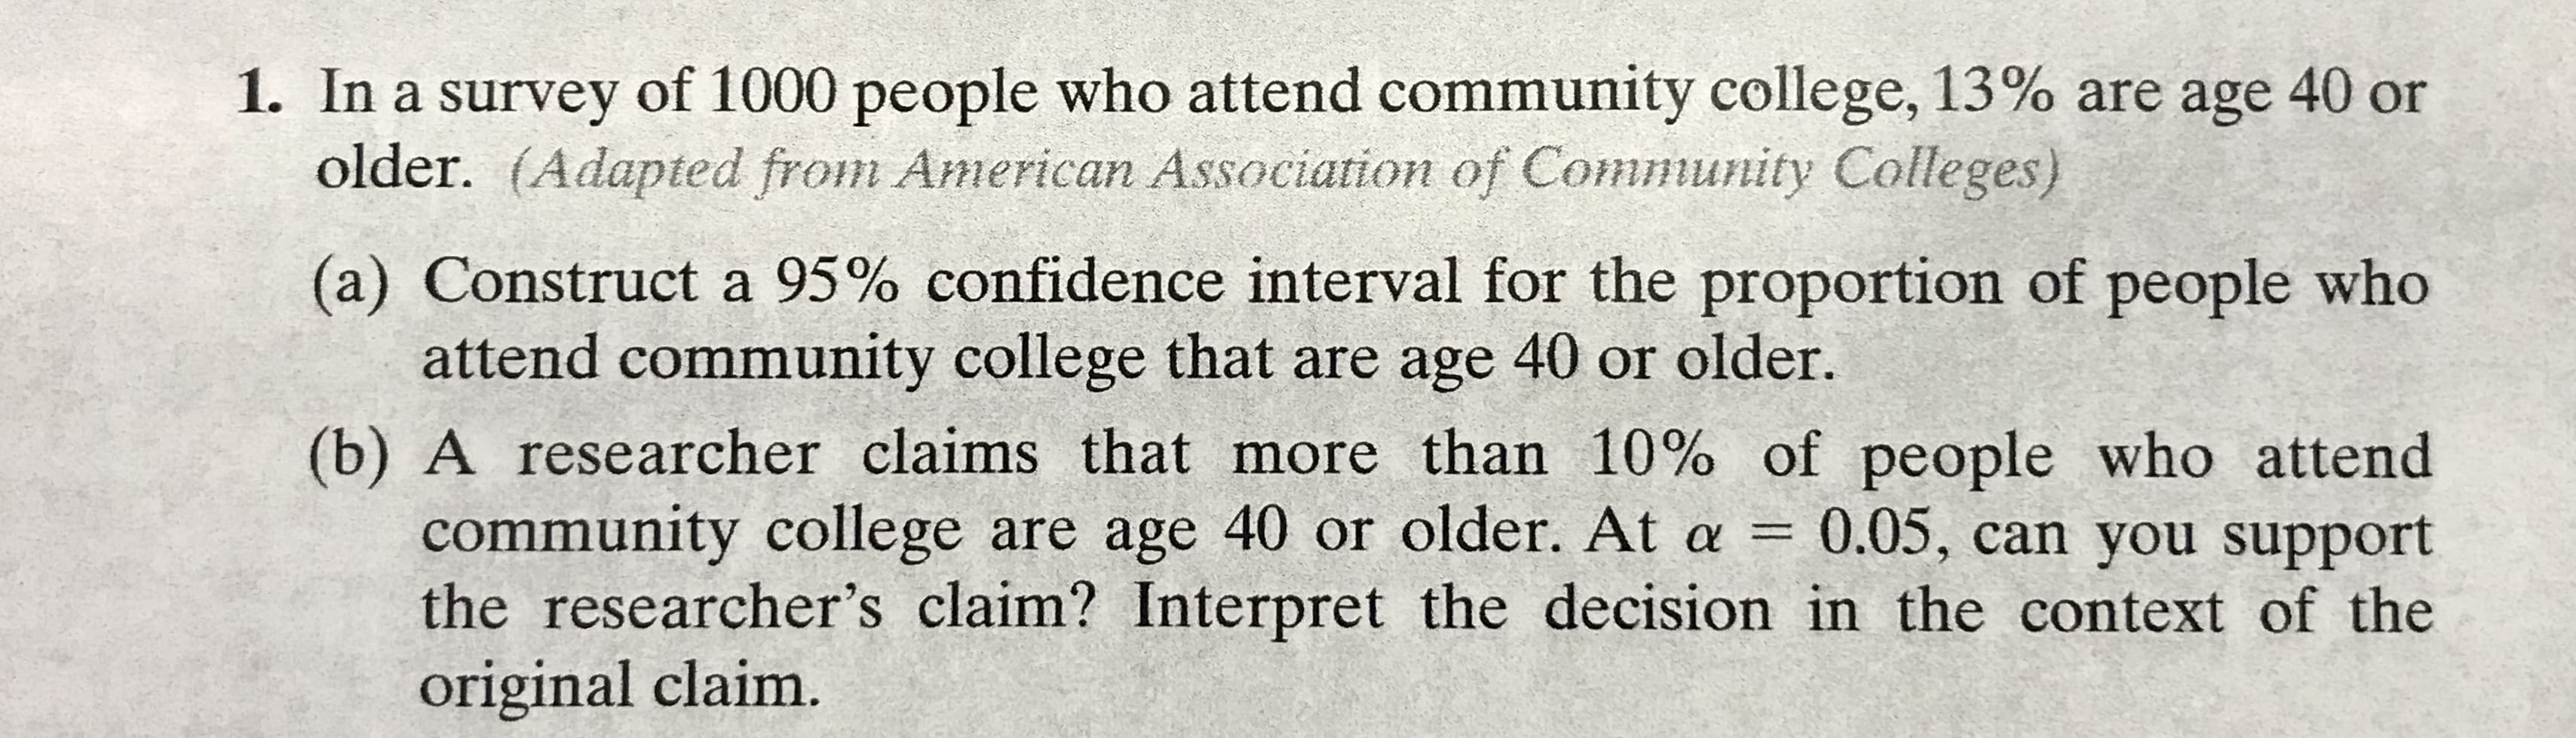 1. In a survey of 1000 people who attend community college, 13% are age 40 or
older. (Adapted from American Association of Community Colleges)
(a) Construct a 95% confidence interval for the proportion of people who
attend community college that are age 40 or older.
(b) A researcher claims that more than 10% of people who attend
community college are age 40 or older. At a = 0.05, can you support
the researcher's claim? Interpret the decision in the context of the
original claim.
%3D
